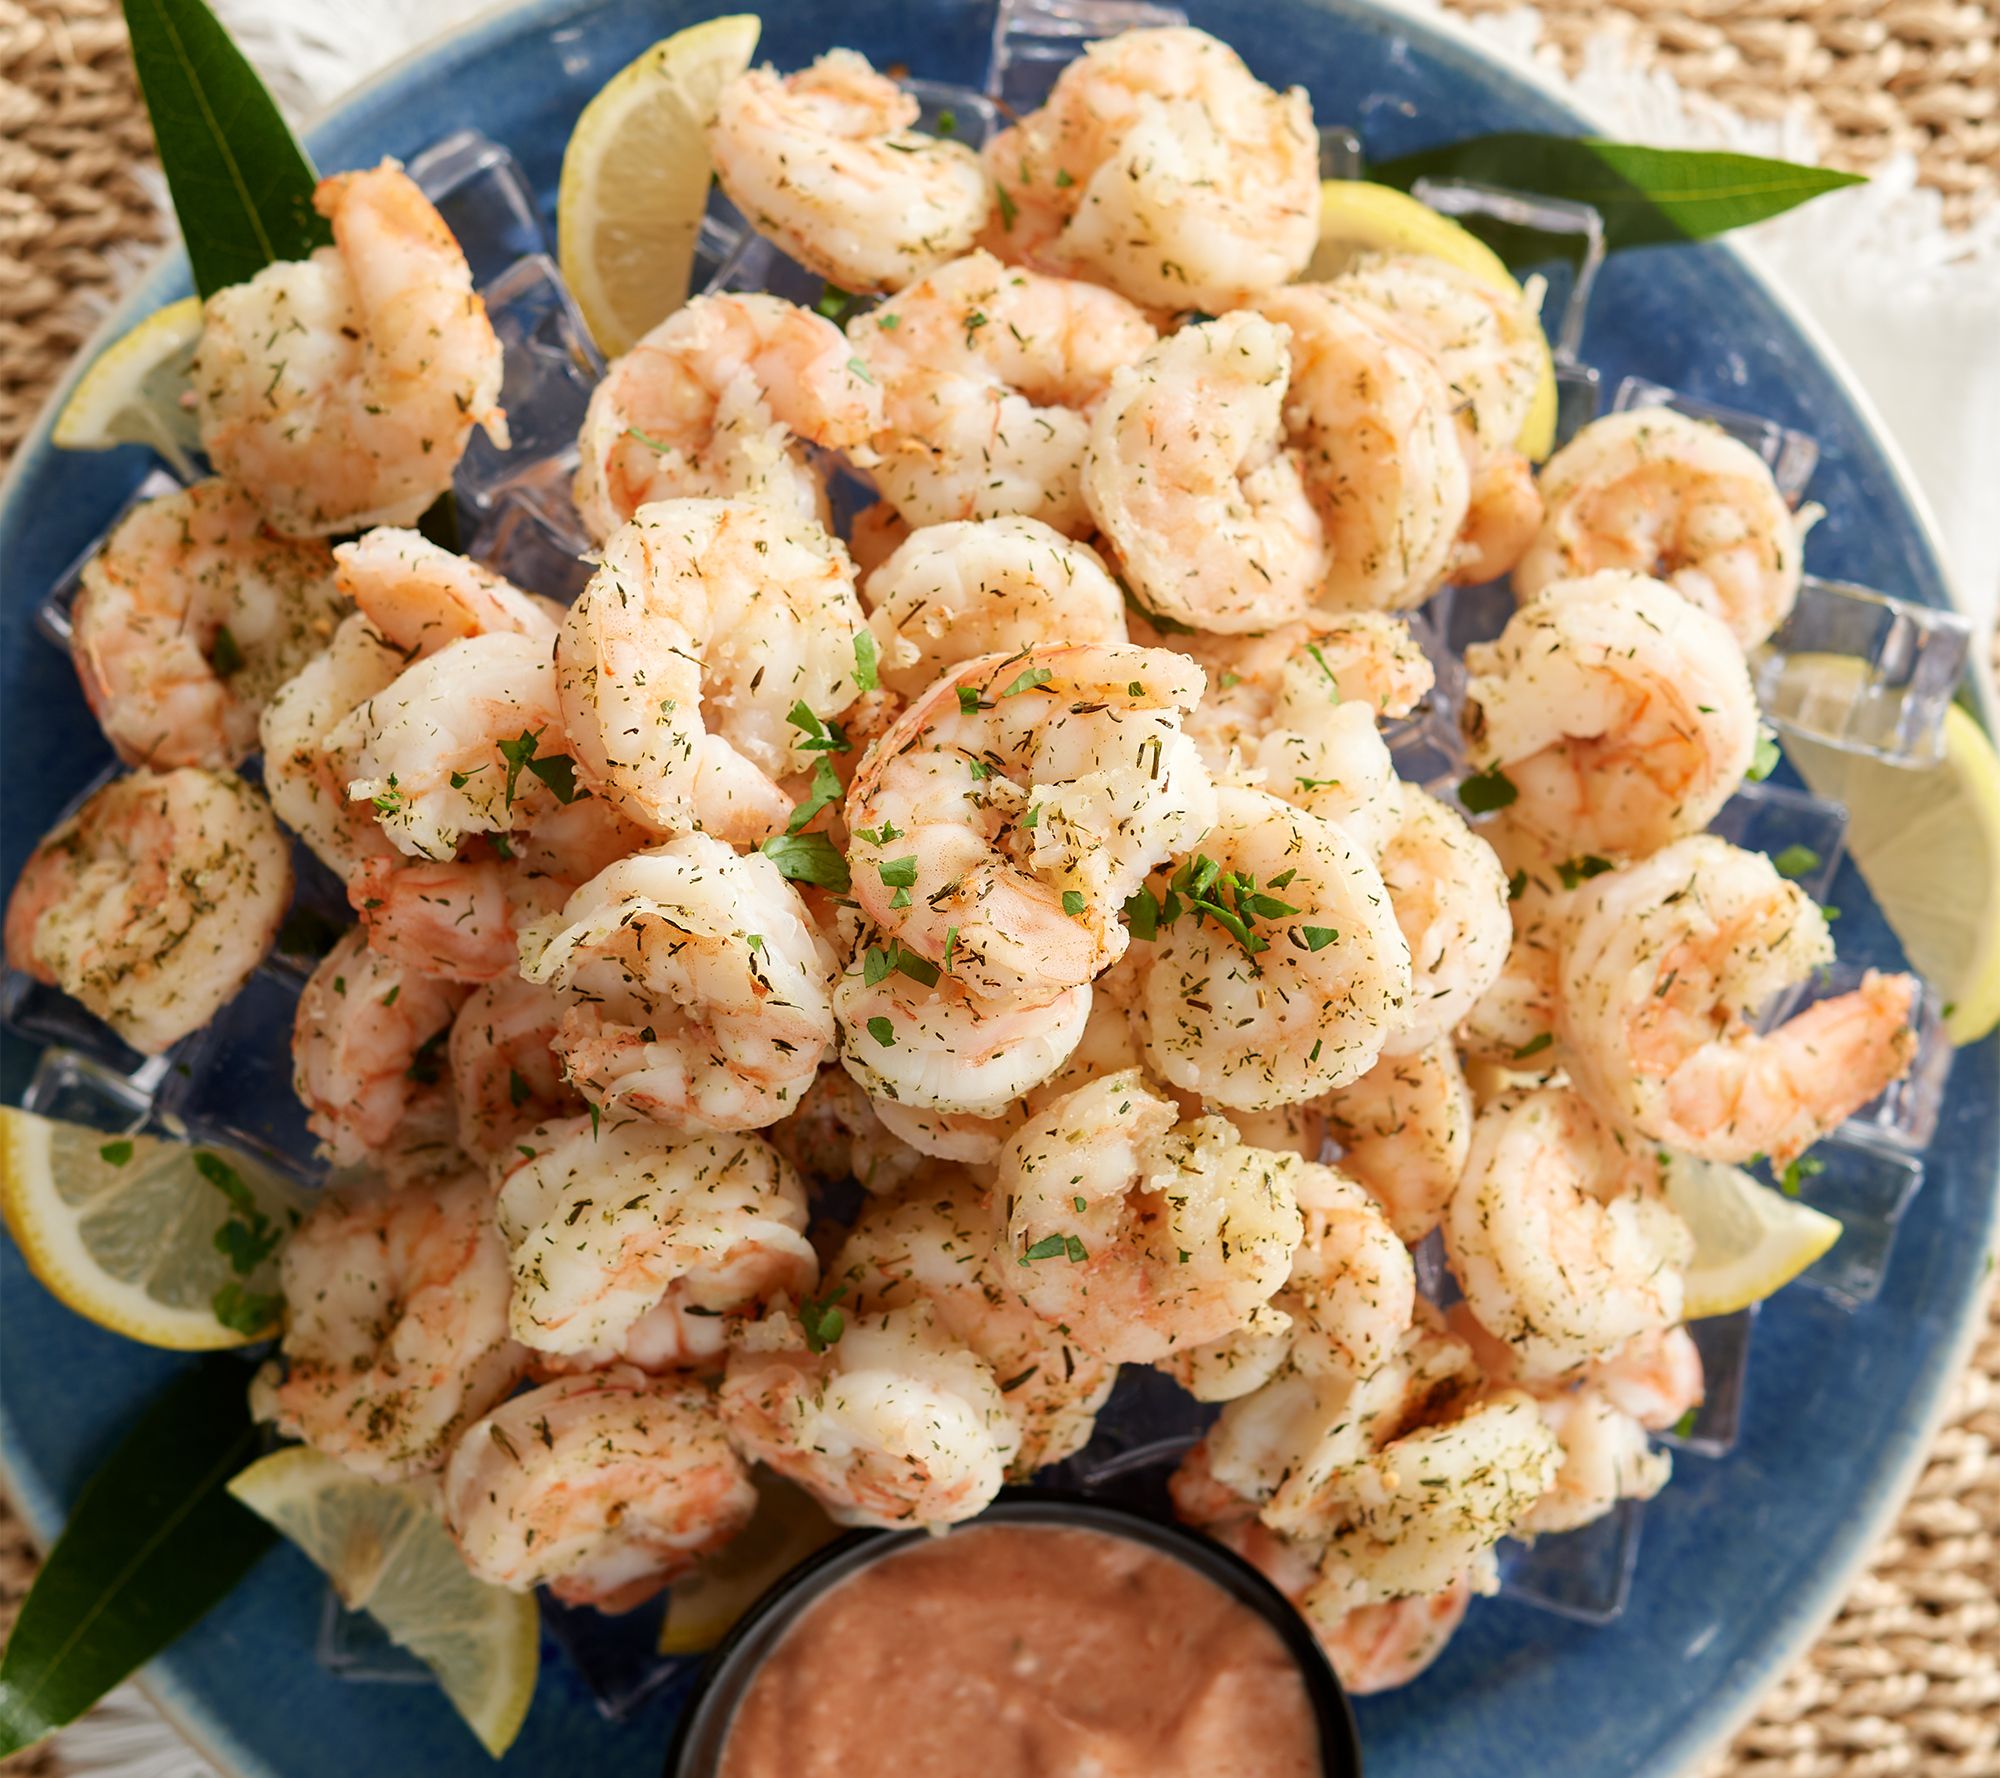 Cooked & Peeled Shrimp Ring, 45ct